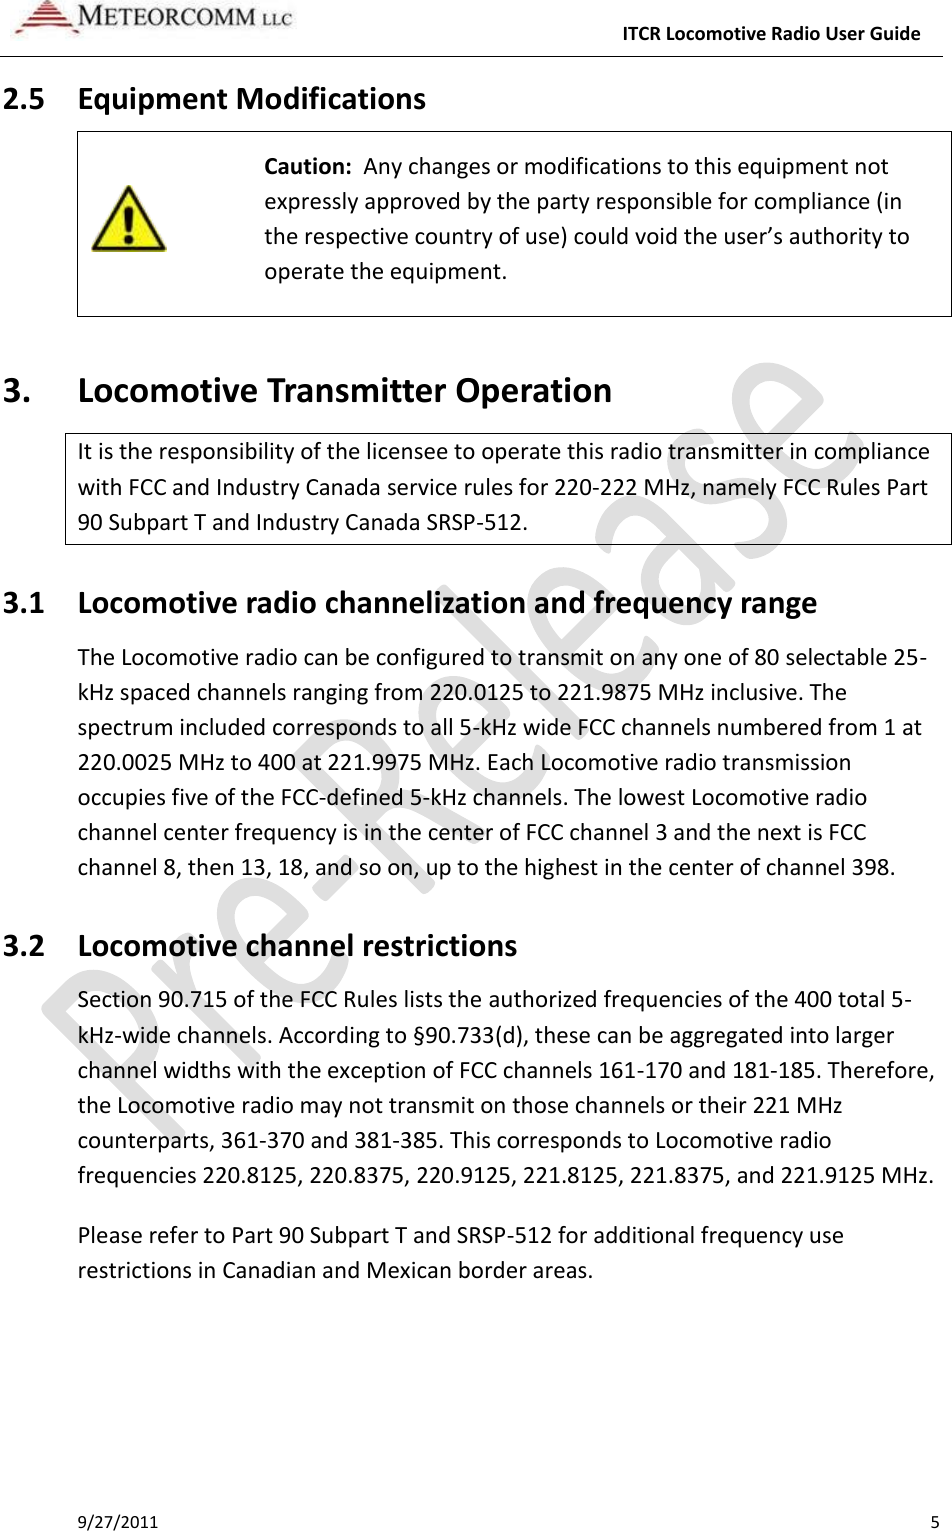     ITCR Locomotive Radio User Guide 9/27/2011    5 2.5 Equipment Modifications   Caution:  Any changes or modifications to this equipment not expressly approved by the party responsible for compliance (in the respective country of use) could void the user’s authority to operate the equipment. 3. Locomotive Transmitter Operation It is the responsibility of the licensee to operate this radio transmitter in compliance with FCC and Industry Canada service rules for 220-222 MHz, namely FCC Rules Part 90 Subpart T and Industry Canada SRSP-512. 3.1 Locomotive radio channelization and frequency range The Locomotive radio can be configured to transmit on any one of 80 selectable 25-kHz spaced channels ranging from 220.0125 to 221.9875 MHz inclusive. The spectrum included corresponds to all 5-kHz wide FCC channels numbered from 1 at 220.0025 MHz to 400 at 221.9975 MHz. Each Locomotive radio transmission occupies five of the FCC-defined 5-kHz channels. The lowest Locomotive radio channel center frequency is in the center of FCC channel 3 and the next is FCC channel 8, then 13, 18, and so on, up to the highest in the center of channel 398. 3.2 Locomotive channel restrictions Section 90.715 of the FCC Rules lists the authorized frequencies of the 400 total 5-kHz-wide channels. According to §90.733(d), these can be aggregated into larger channel widths with the exception of FCC channels 161-170 and 181-185. Therefore, the Locomotive radio may not transmit on those channels or their 221 MHz counterparts, 361-370 and 381-385. This corresponds to Locomotive radio frequencies 220.8125, 220.8375, 220.9125, 221.8125, 221.8375, and 221.9125 MHz. Please refer to Part 90 Subpart T and SRSP-512 for additional frequency use restrictions in Canadian and Mexican border areas. 